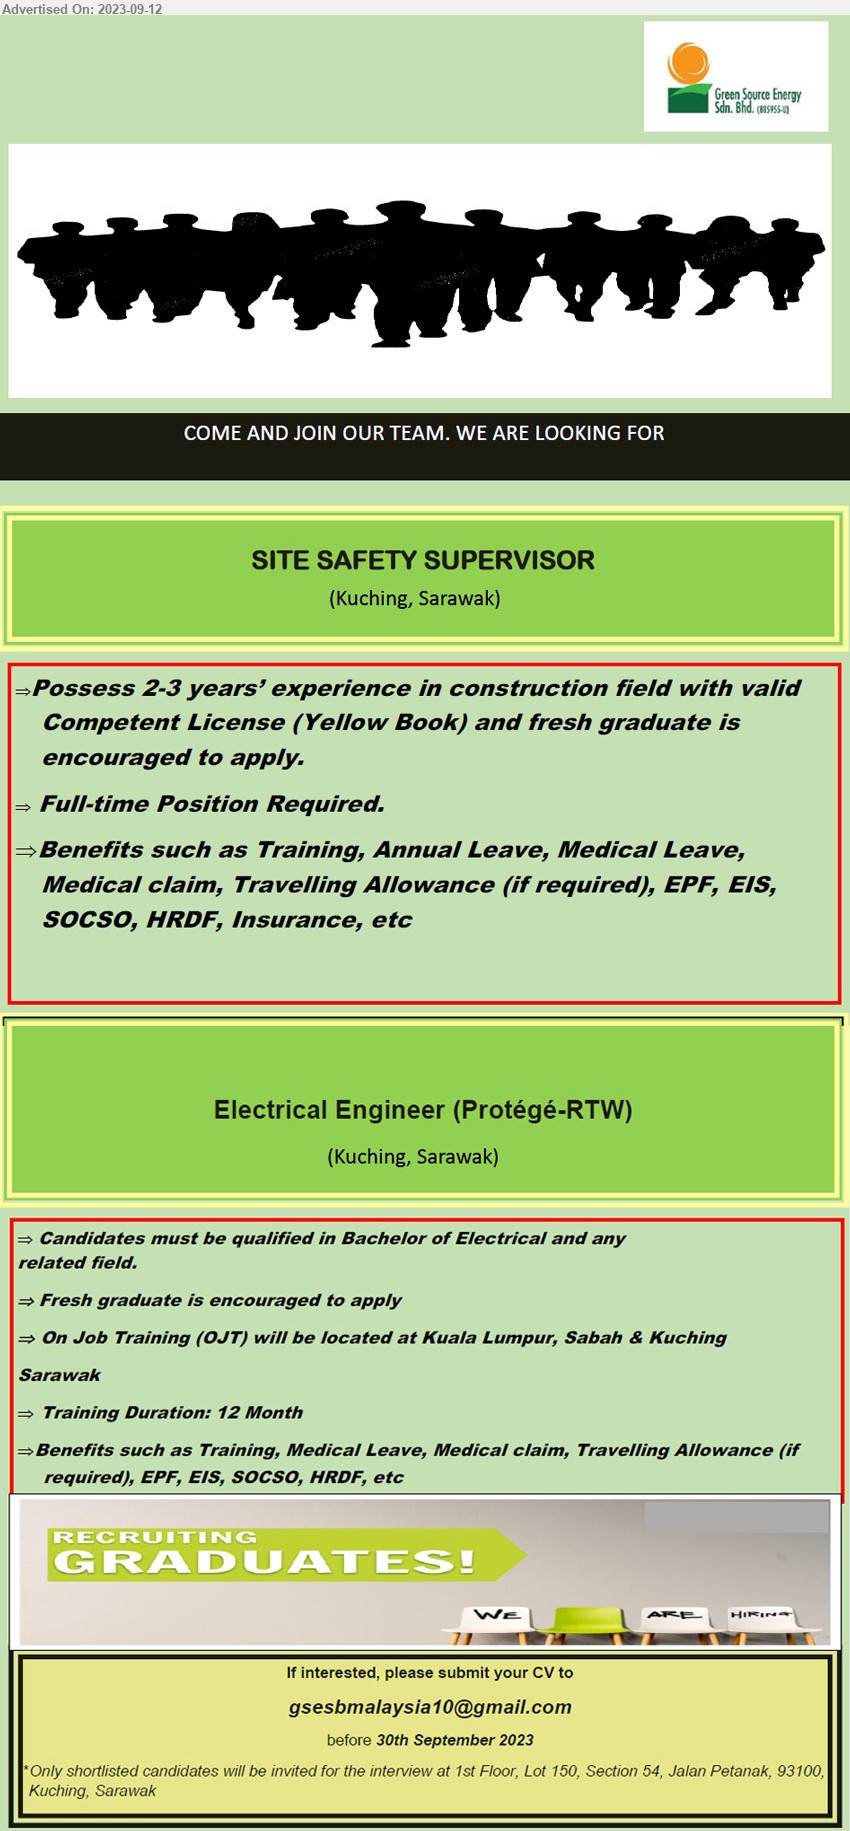 GREEN SOURCE ENERGY SDN BHD - 1. SITE SAFETY SUPERVISOR (Kuching), Diploma in Occupational, Safety and Health, Must have Yellow book,...
2. ELECTRICAL ENGINEER (PROTÉGÉ RTW) (Kuching), Degree in Electrical, Fresh graduate is encouraged to apply,...
Email resume to ...